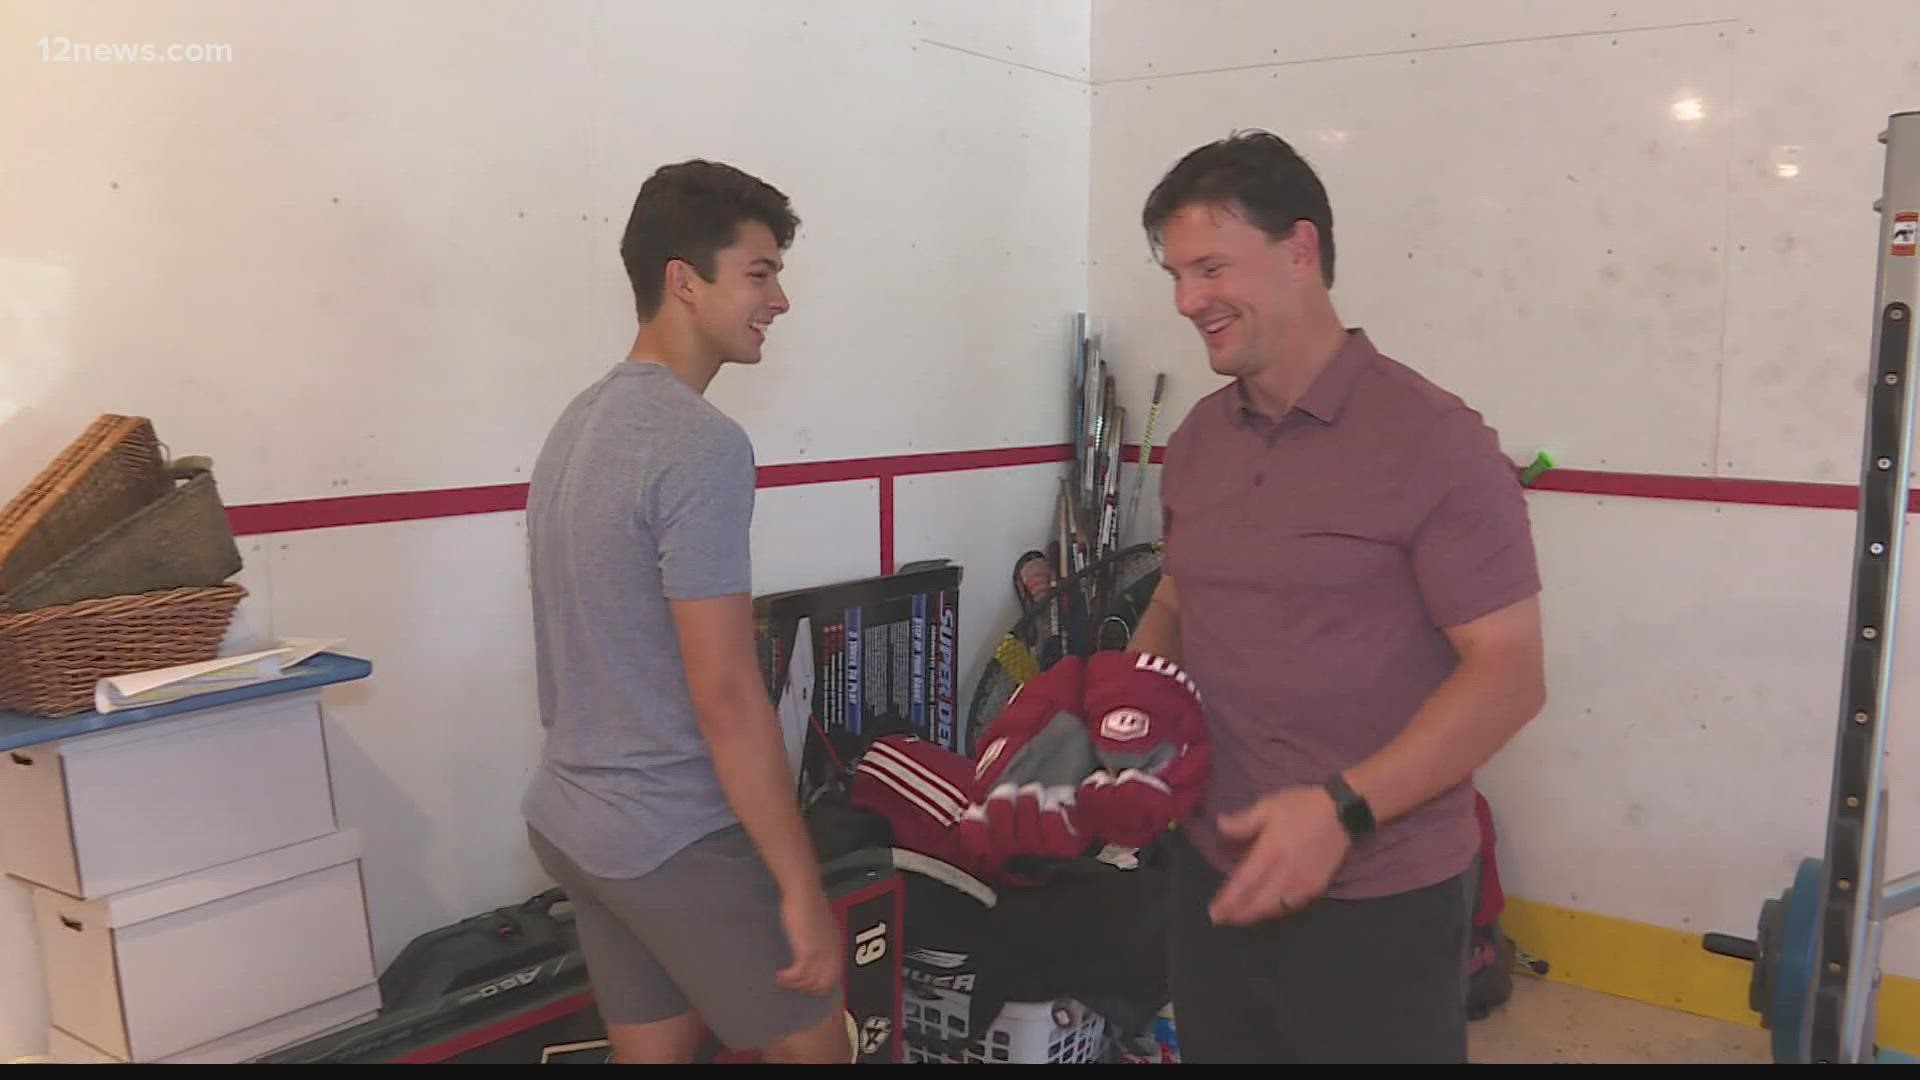 The Coyotes' most famous player, Shane Doan, has a new roommate! It's first-round pick Dylan Guenther and he's being the perfect house guest!